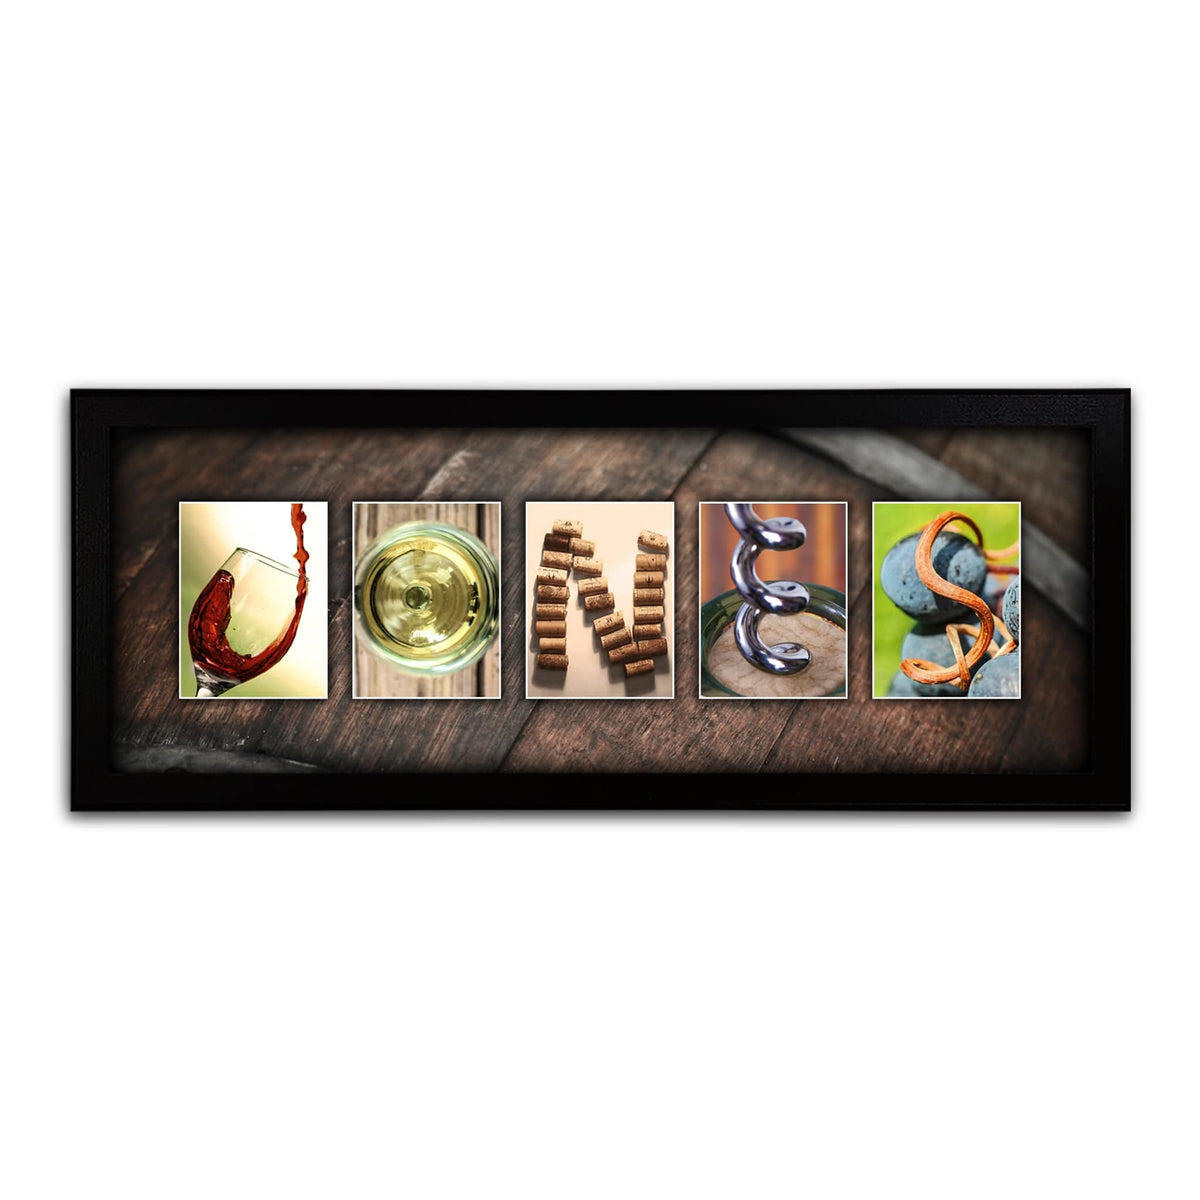 Personalized Wine Gift - Name art framed canvas from Personal Prints